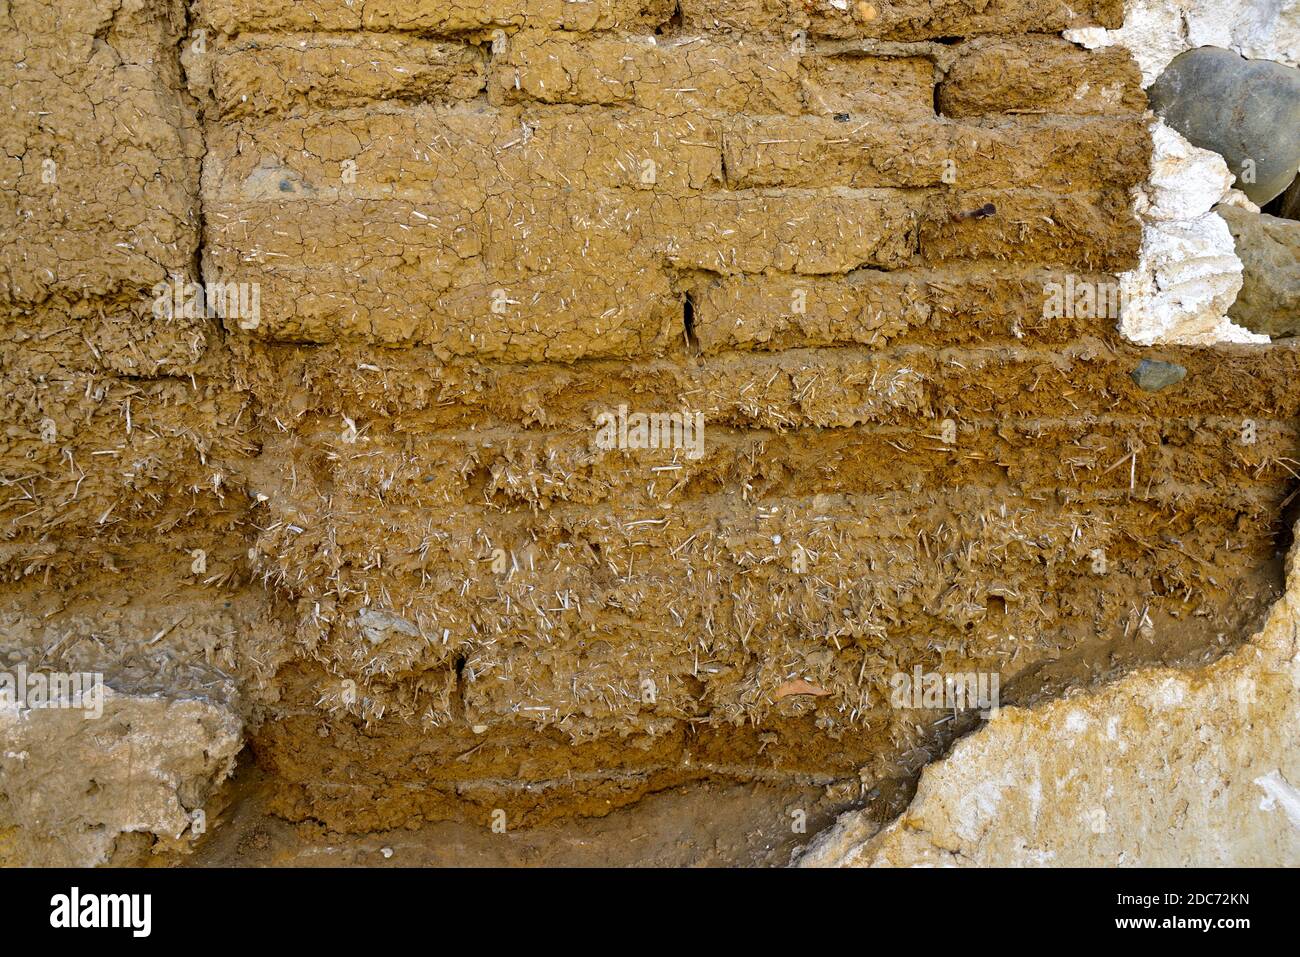 Old handmade clay and straw mud bricks exposed in wall Stock Photo